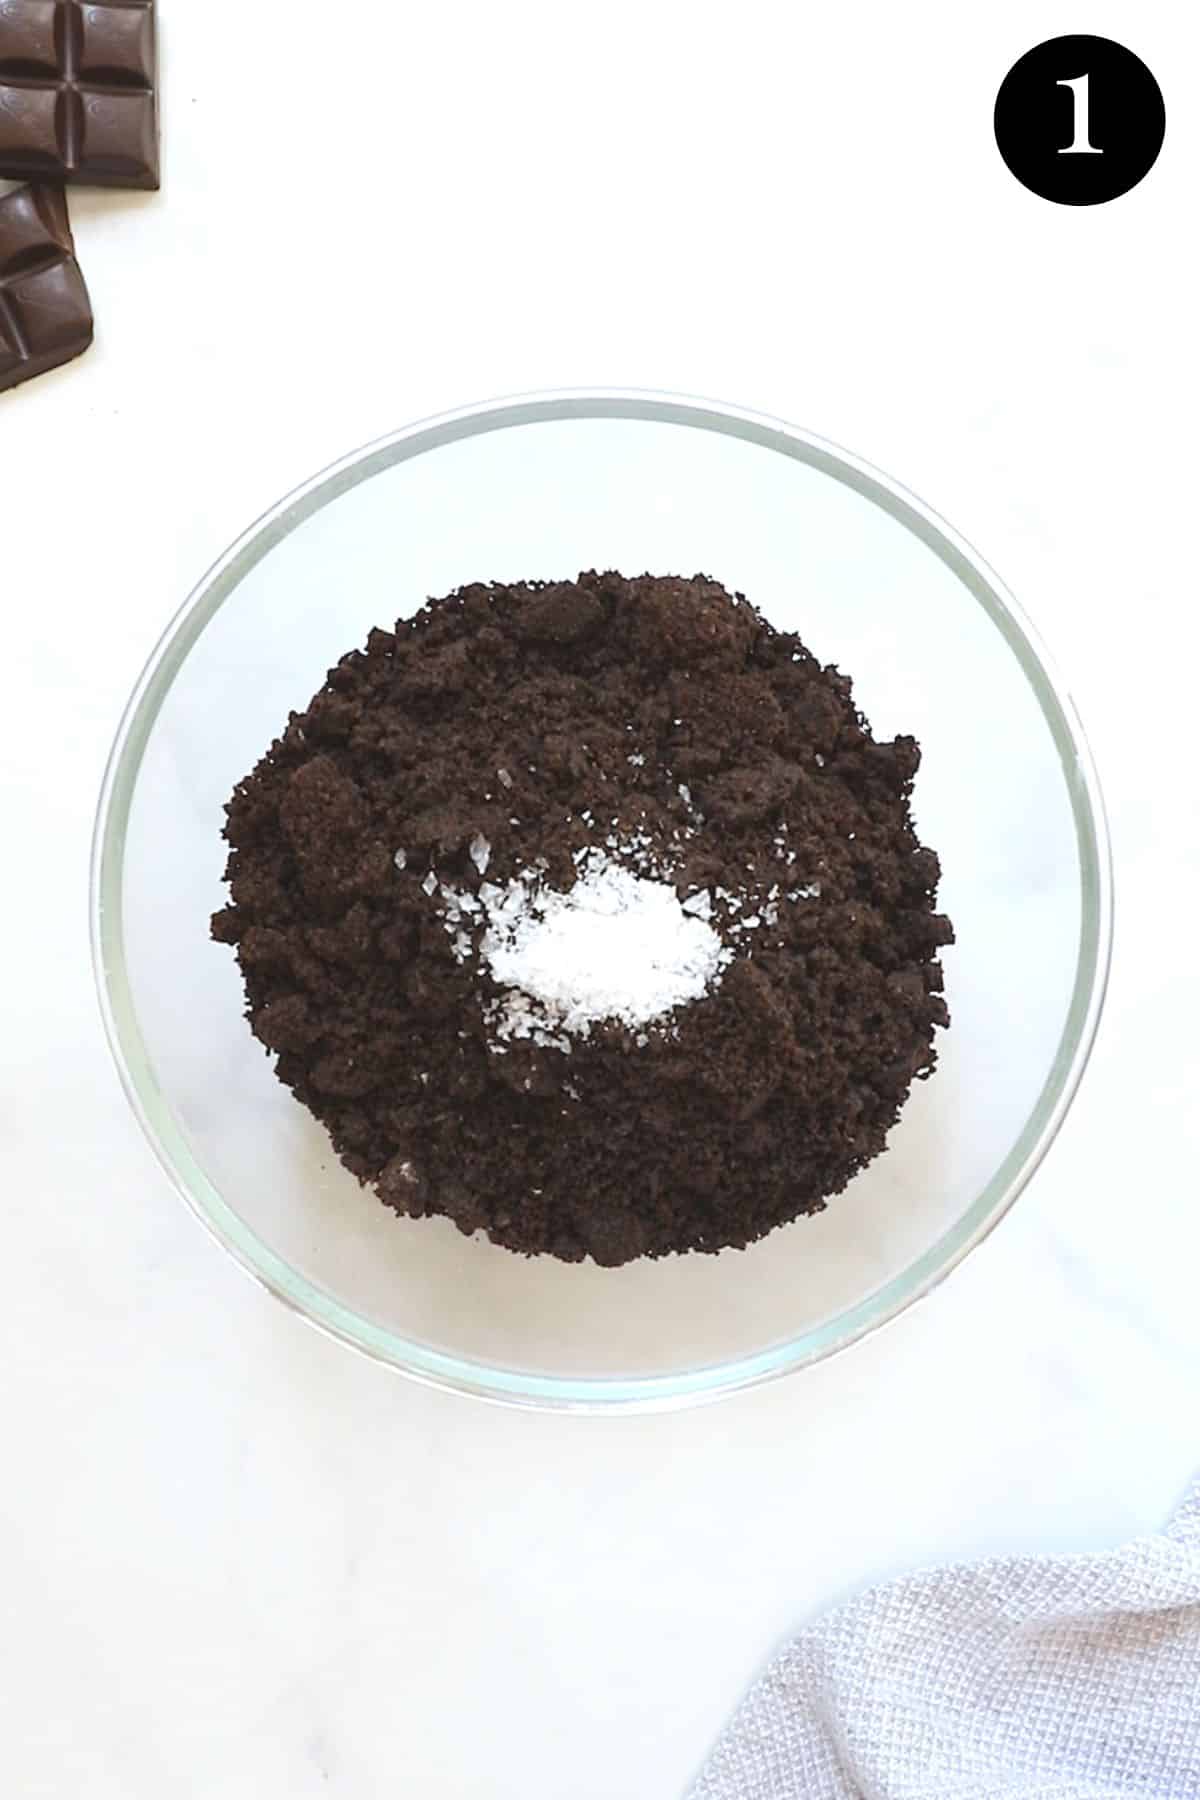 crushed oreos in a bowl with salt and chocolate.